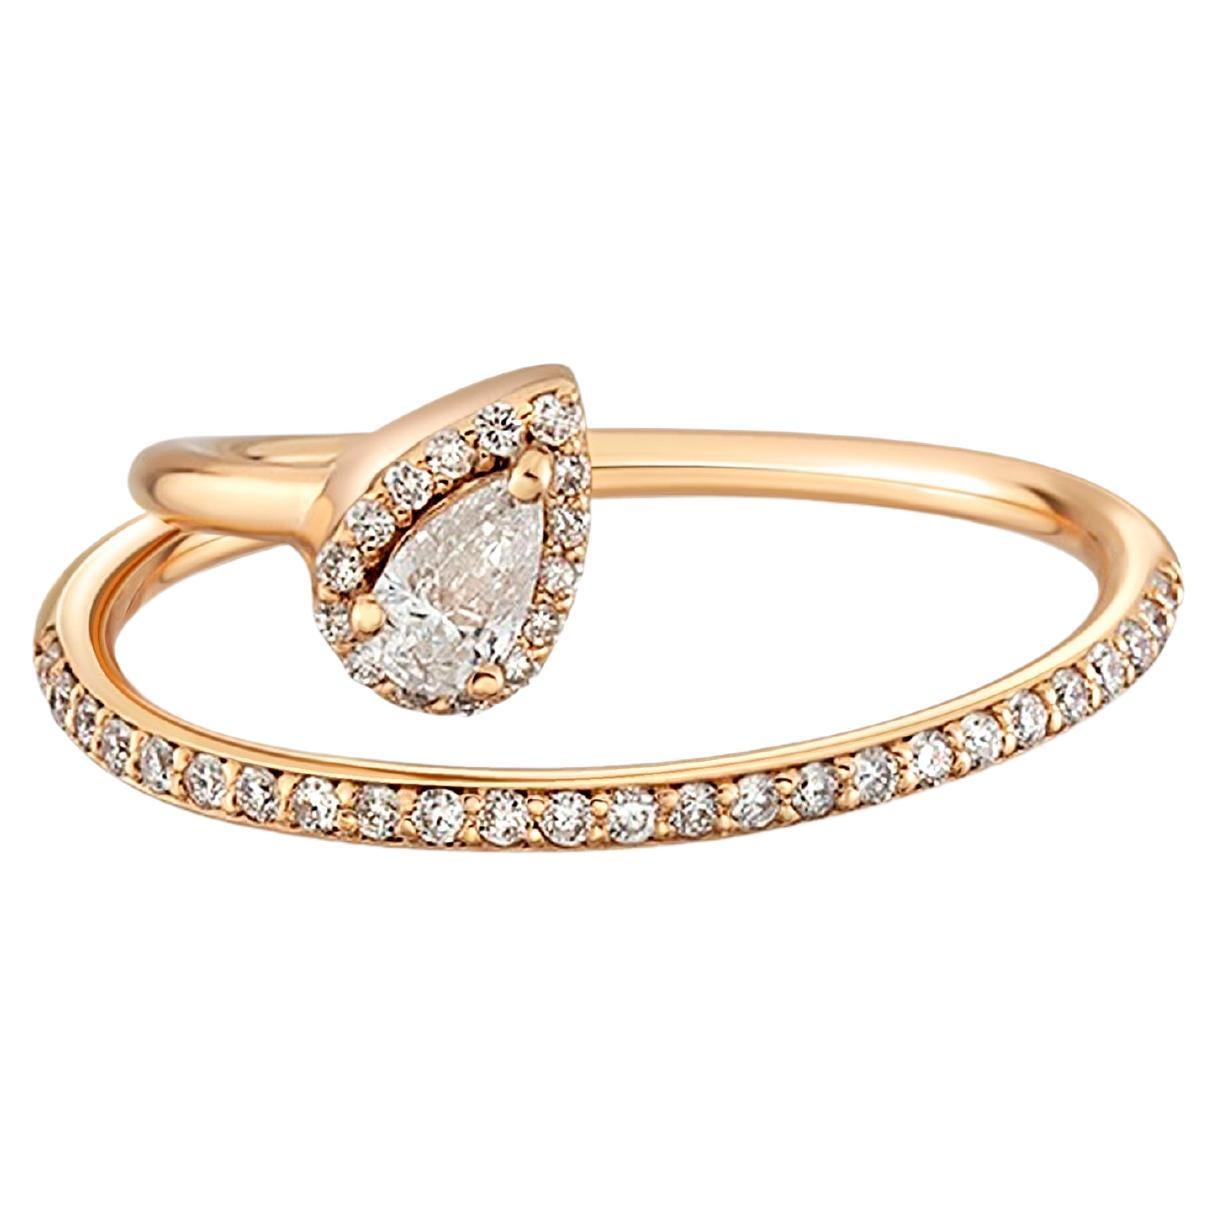 What is a double band engagement ring?